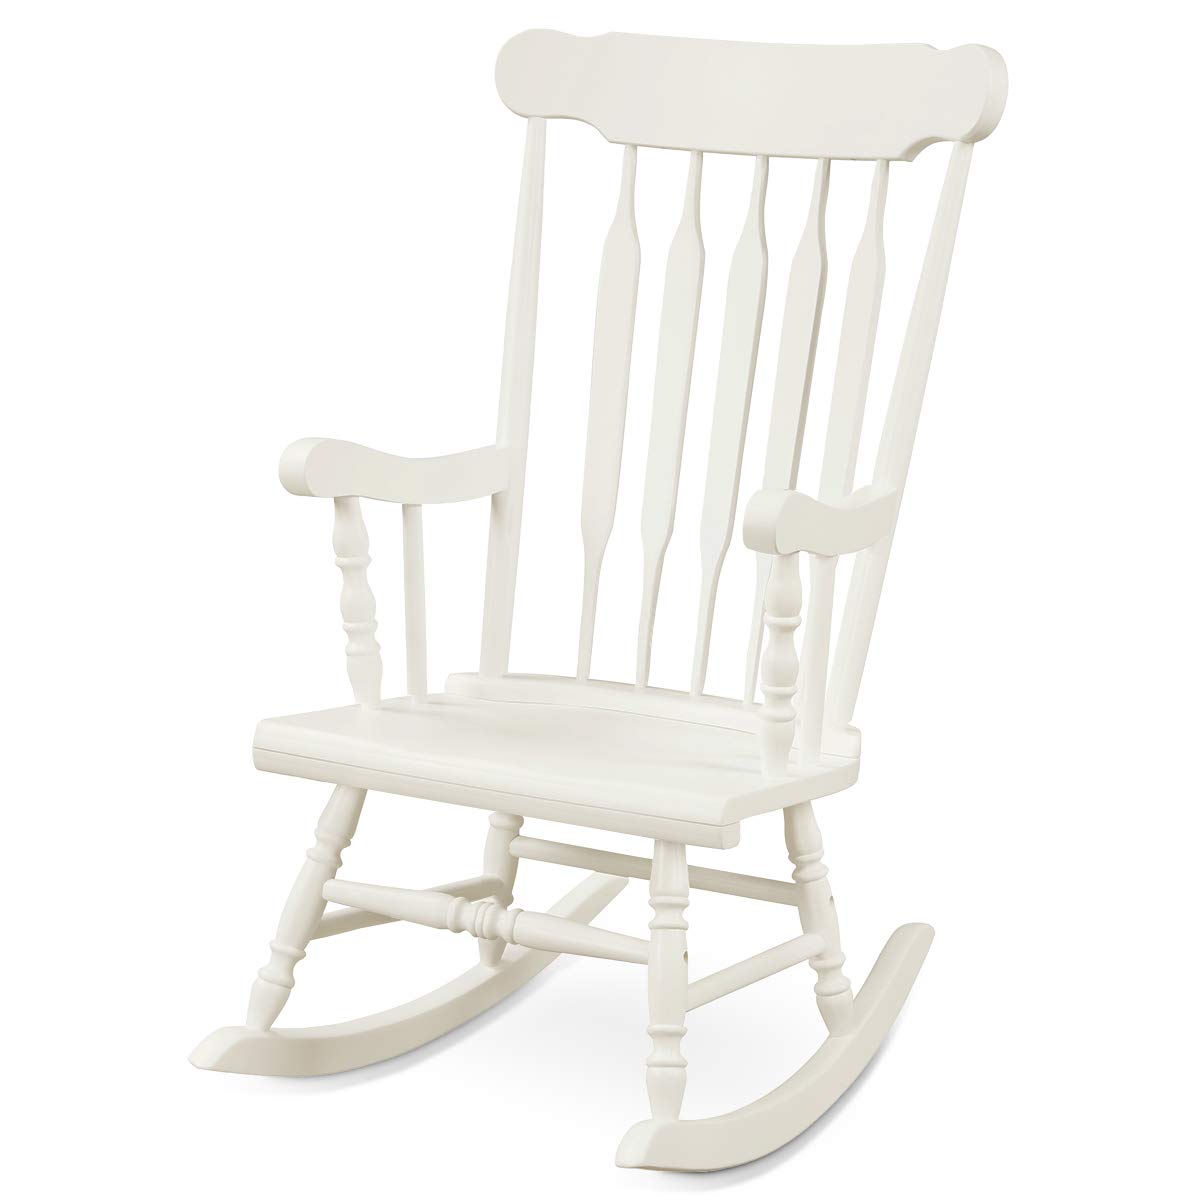 Giantex Outdoor Wood Rocking Chair - Set of 2 Patio Rocking Chair with Solid Frame